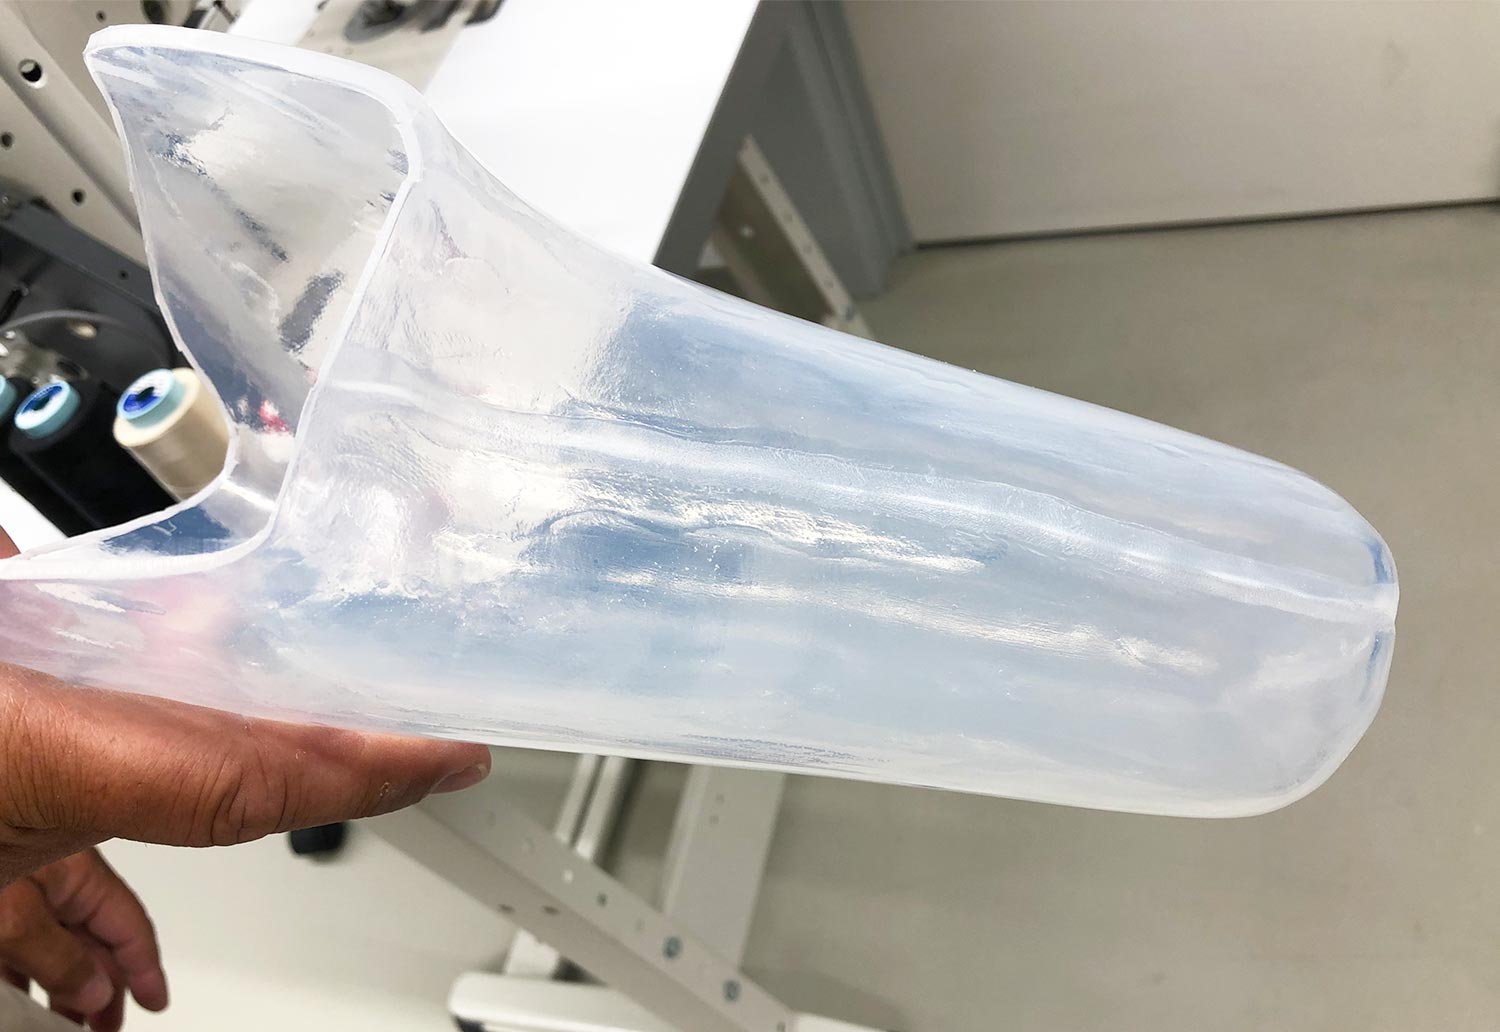 Finished semi-clear thermoplastic transtibial socket